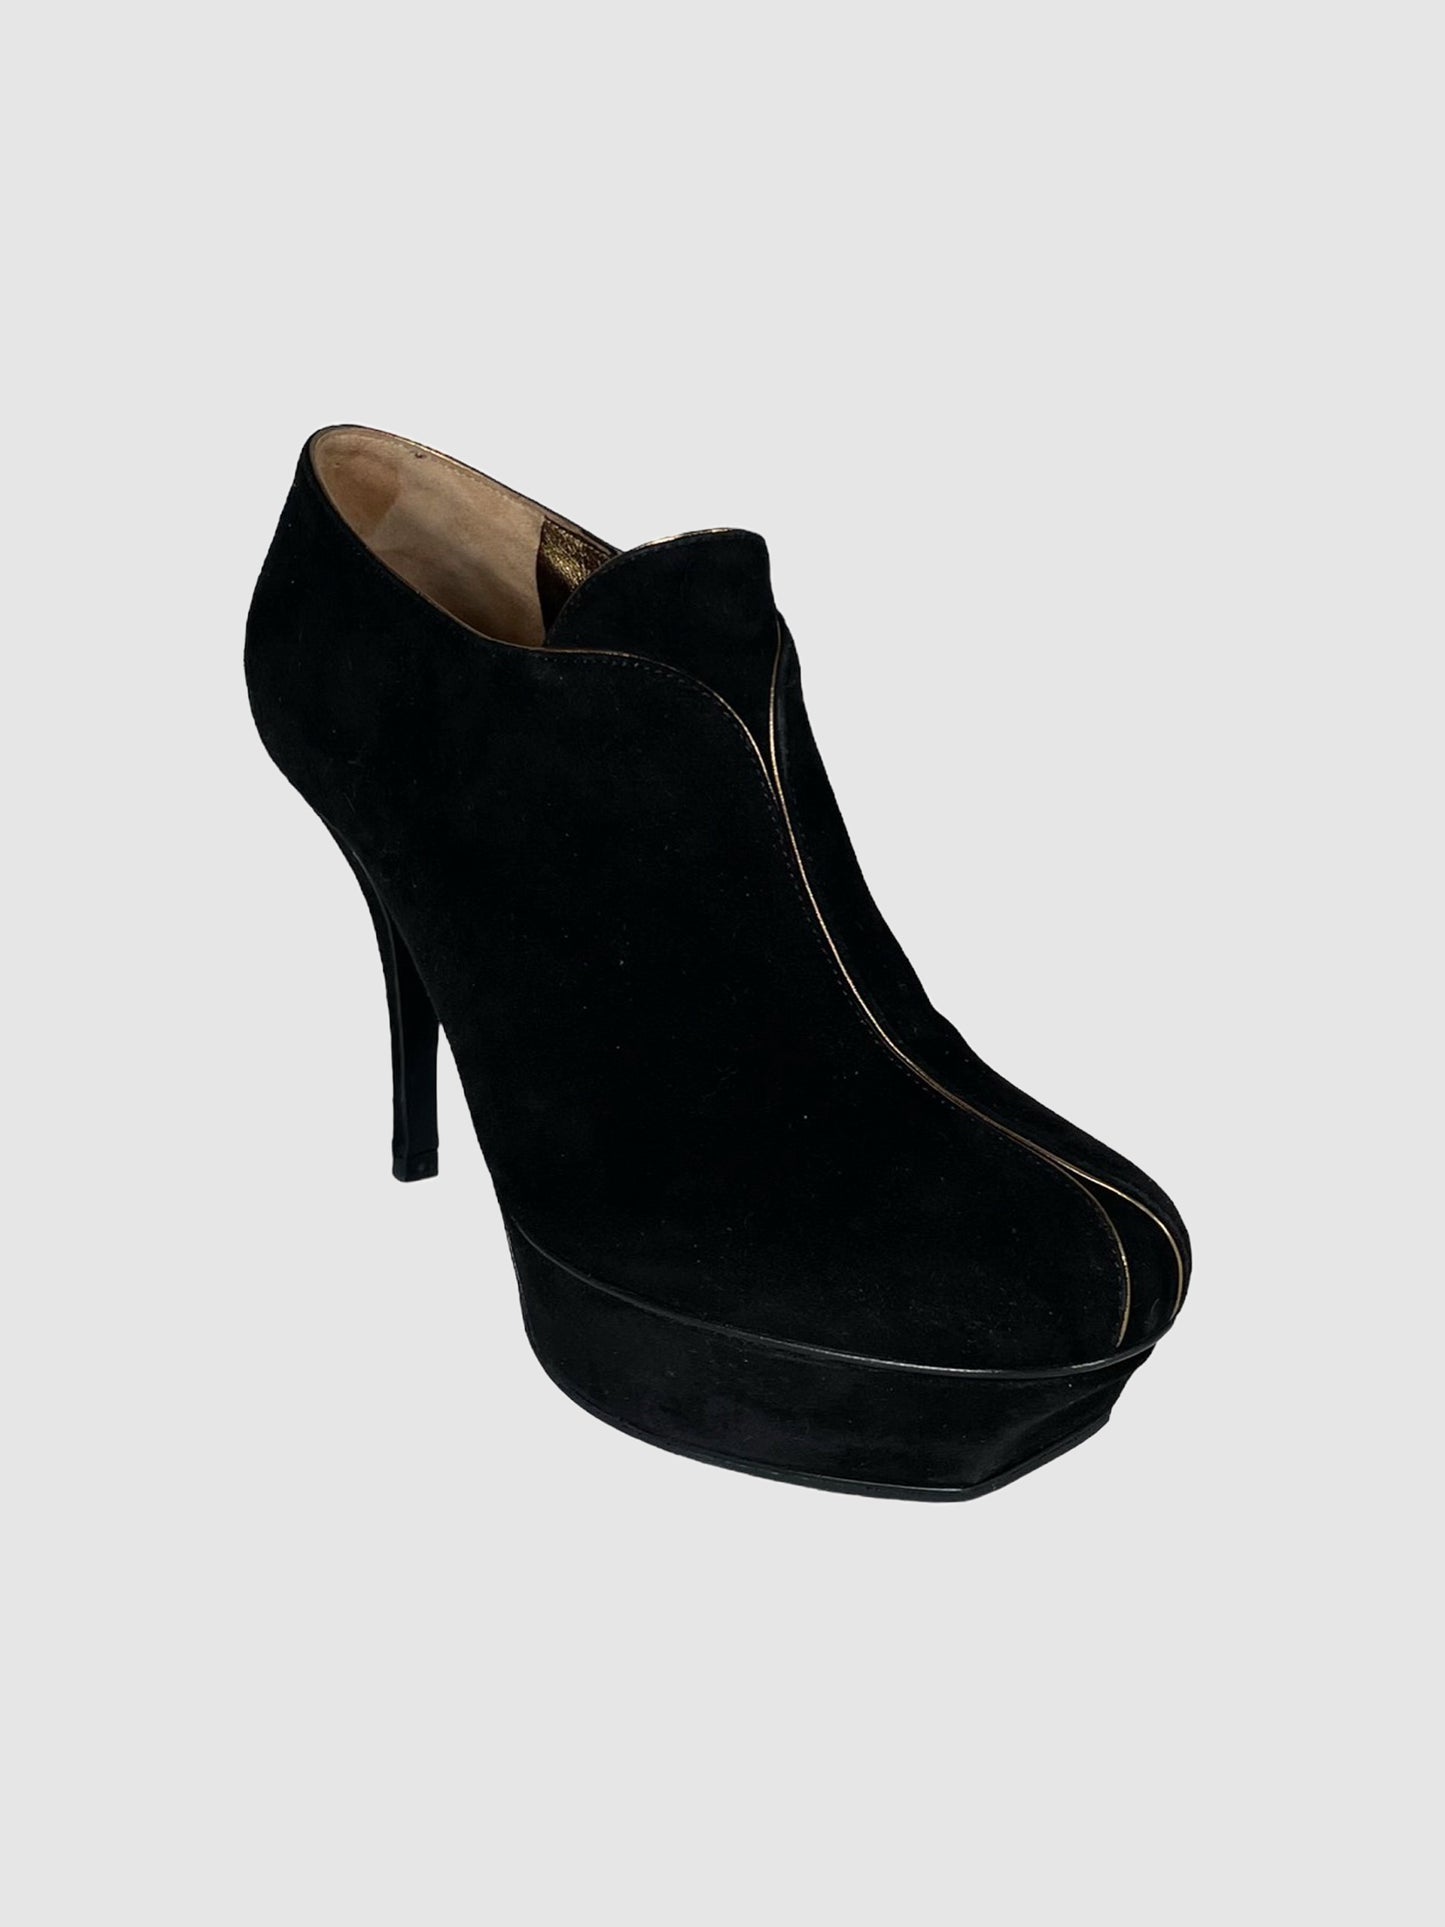 TribToo Ankle Booties - Size 36.5